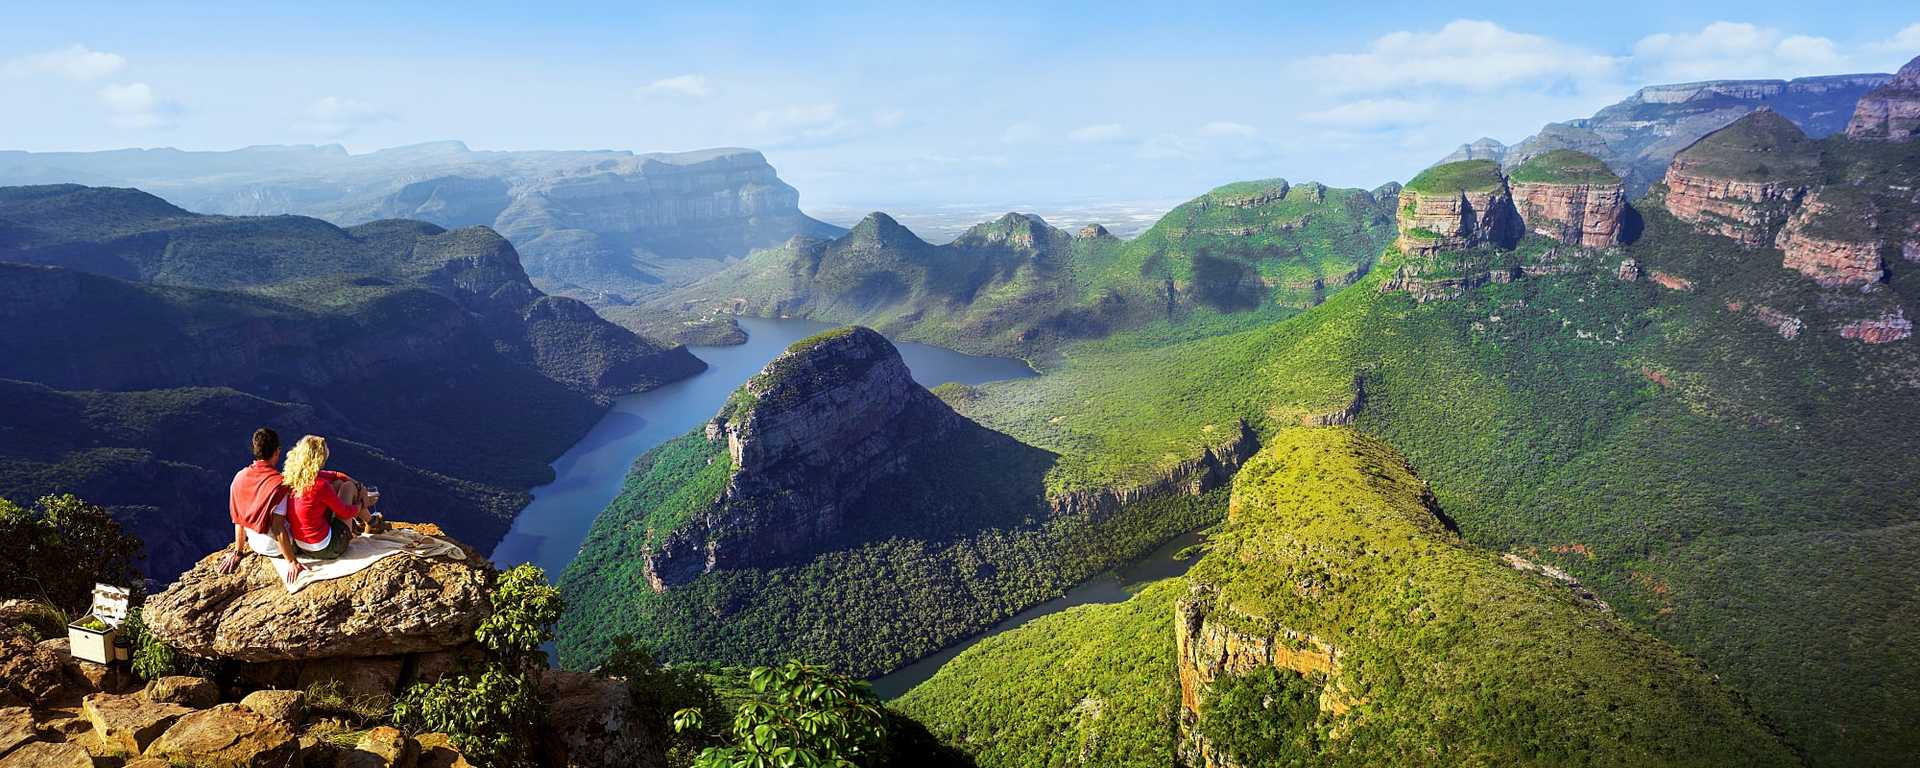 Couple at Blyde River Canyon in South Africa